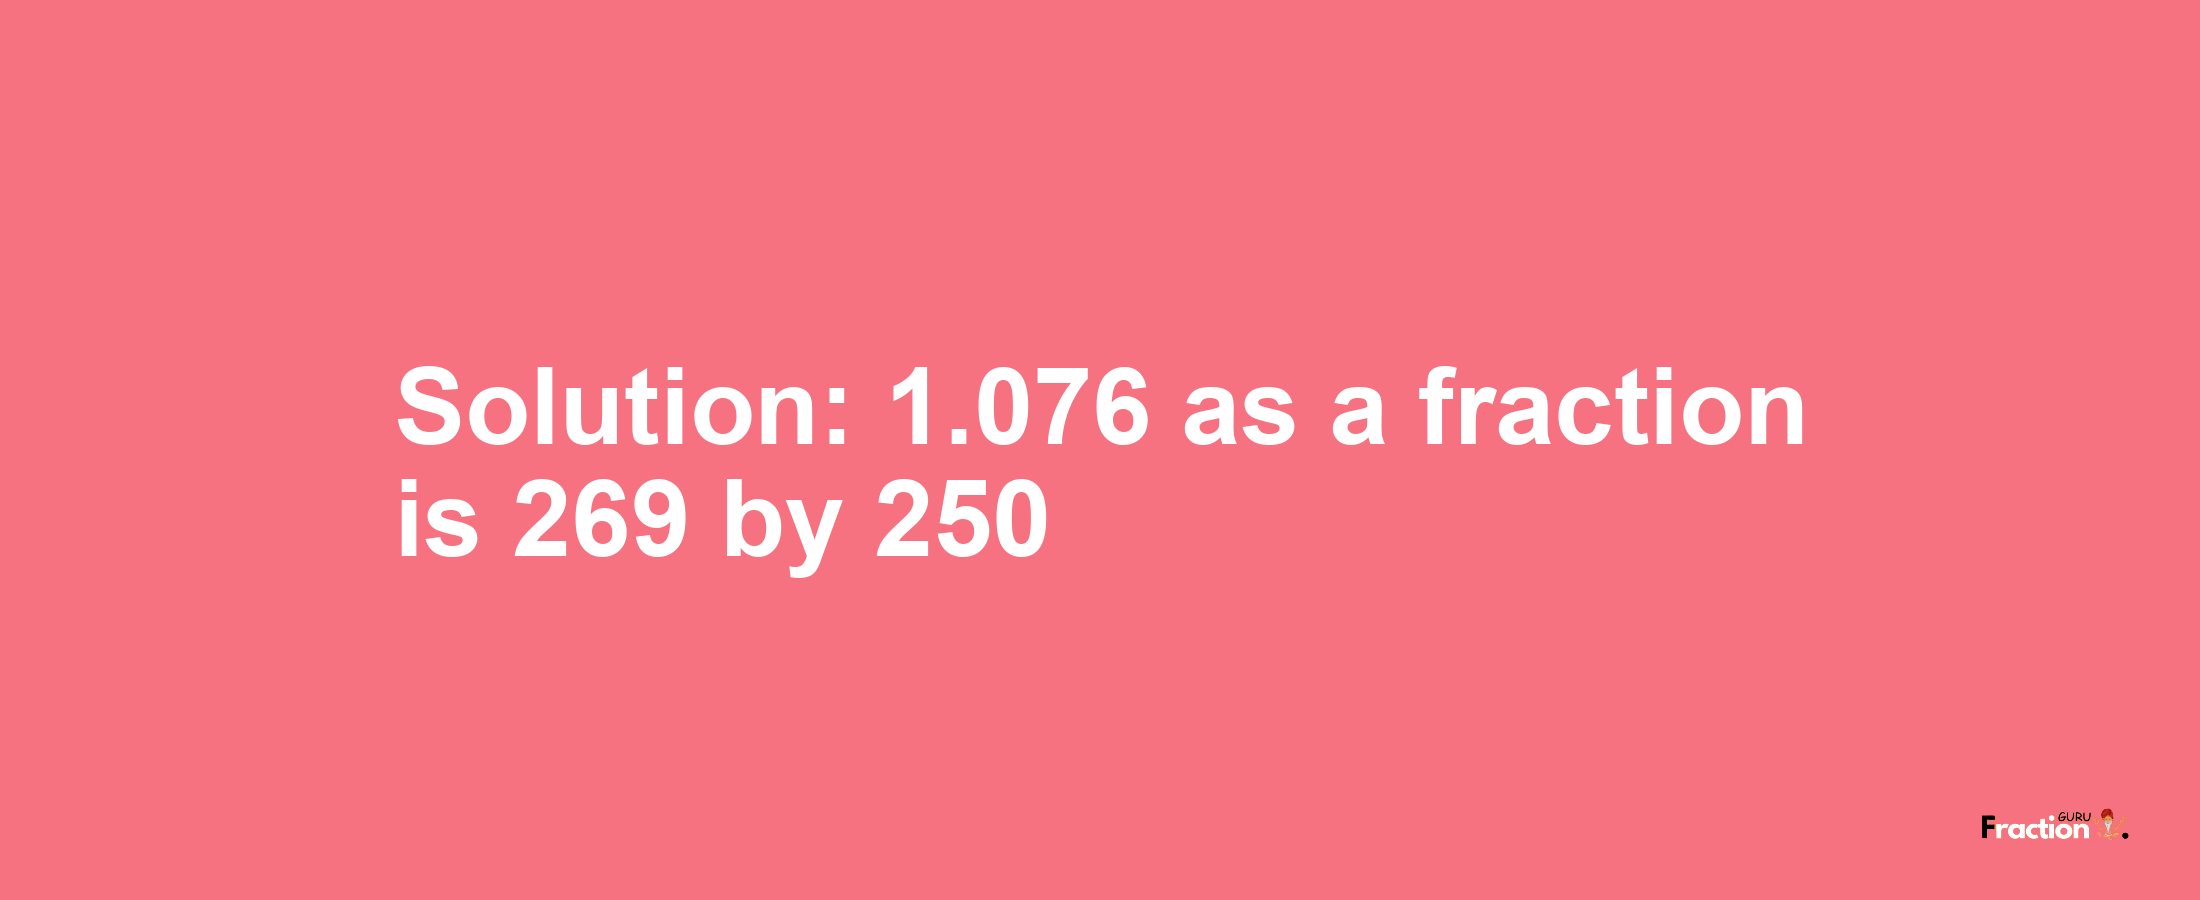 Solution:1.076 as a fraction is 269/250